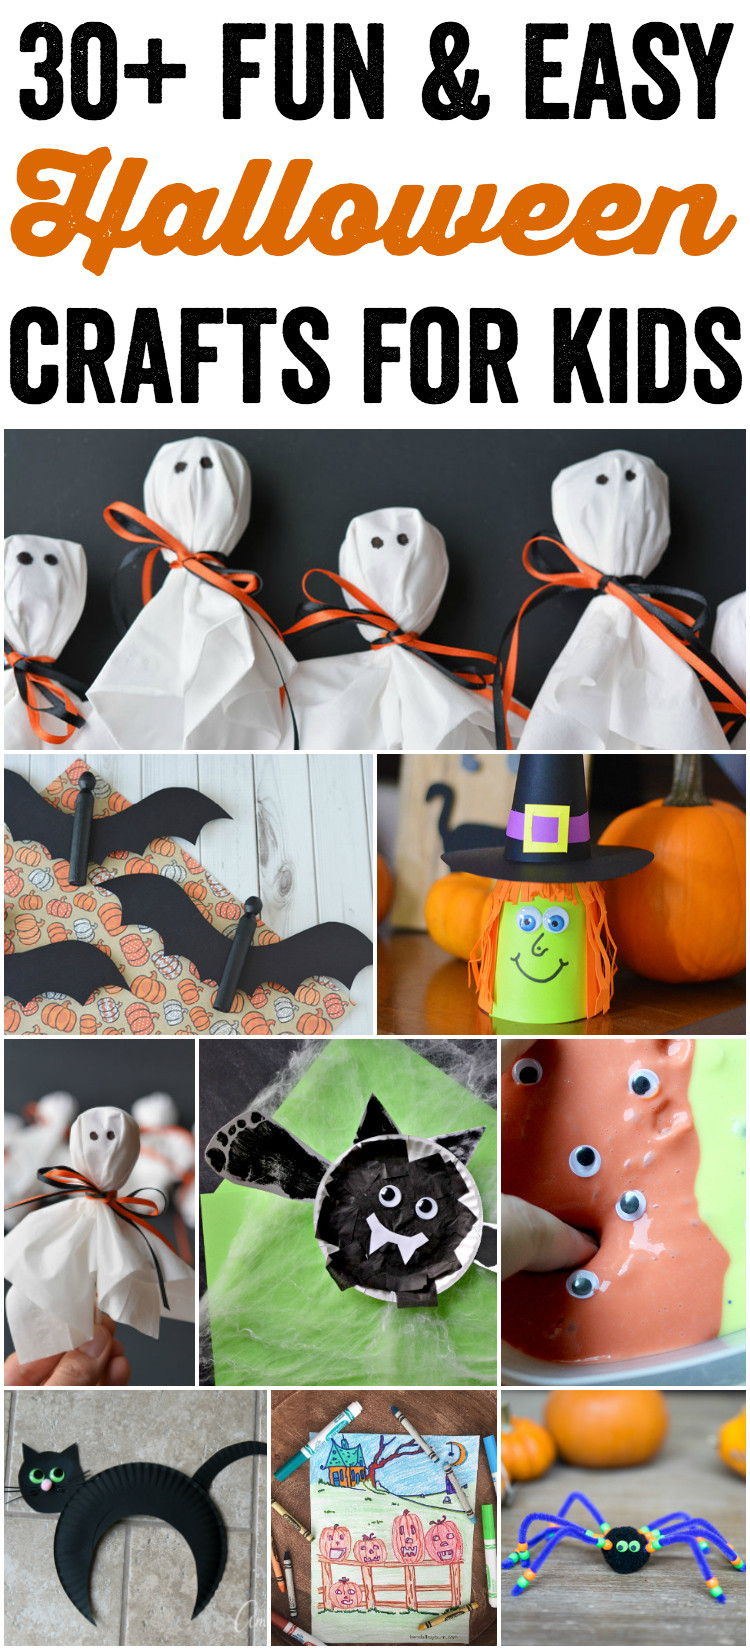 Easy Halloween Crafts For Kids
 Fun and Easy Halloween Crafts for Kids